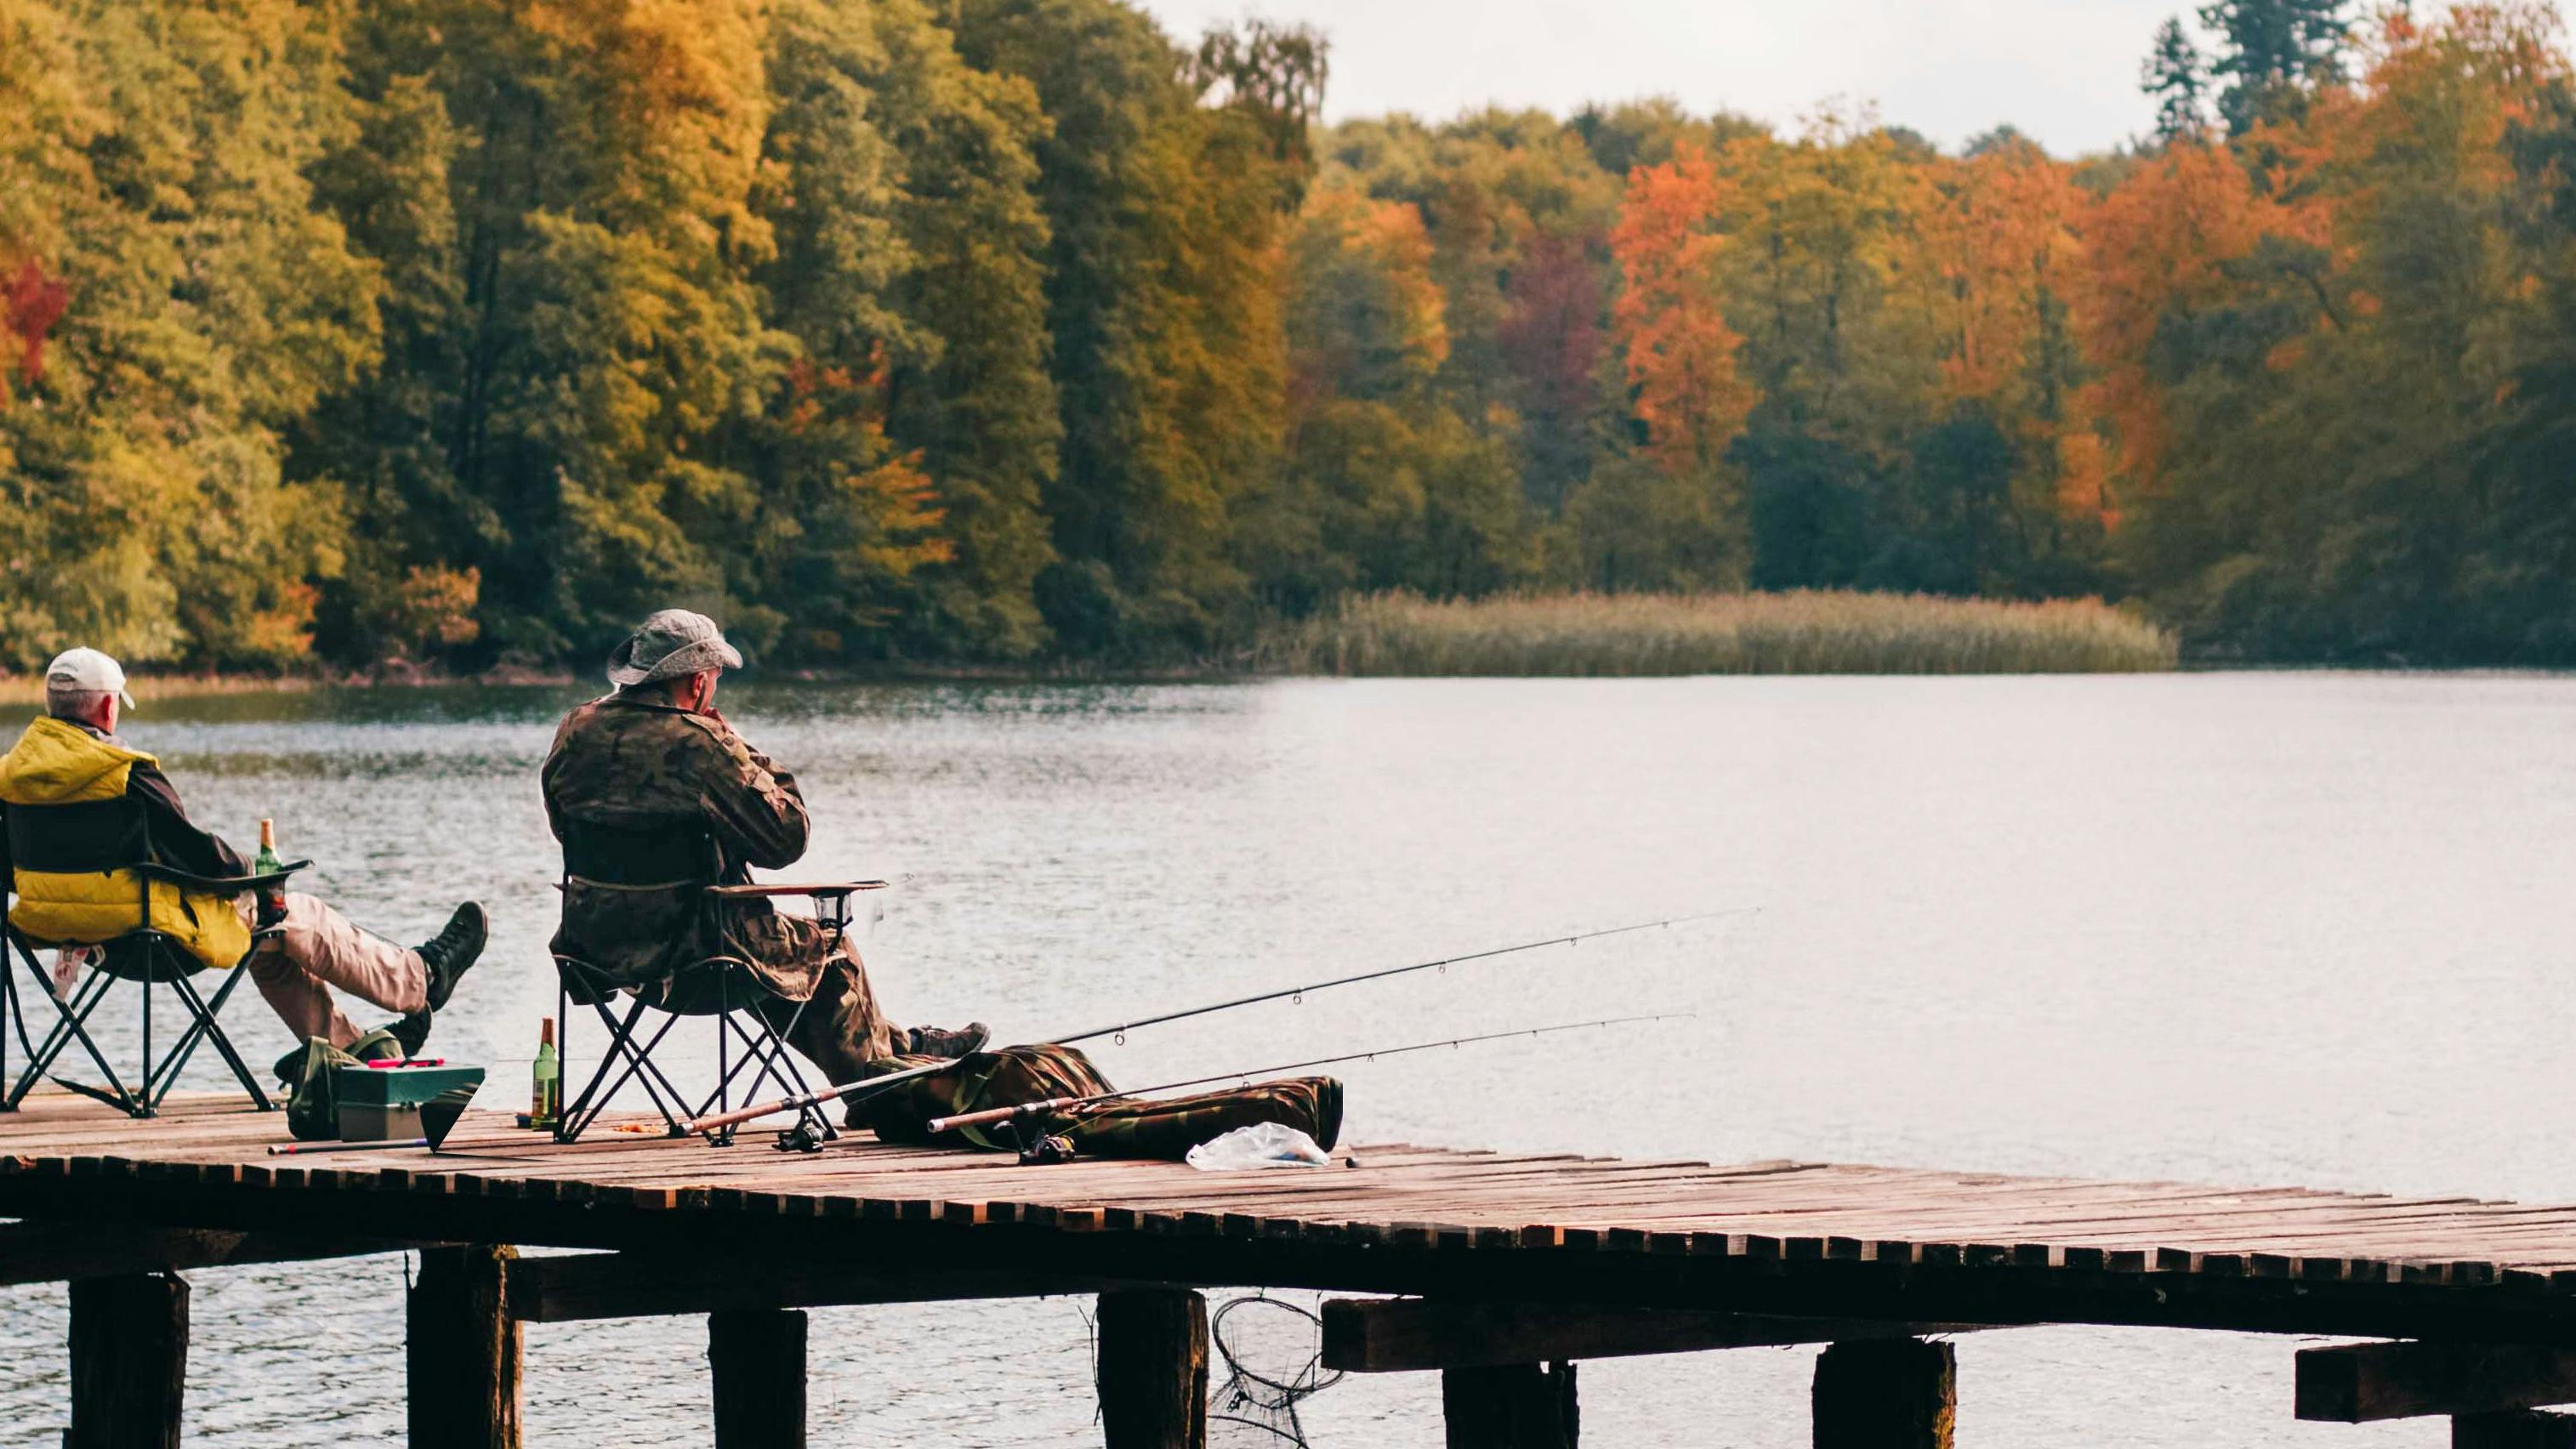 Two men sit on a dock and fish. The trees surrounding the pond are changing colors.